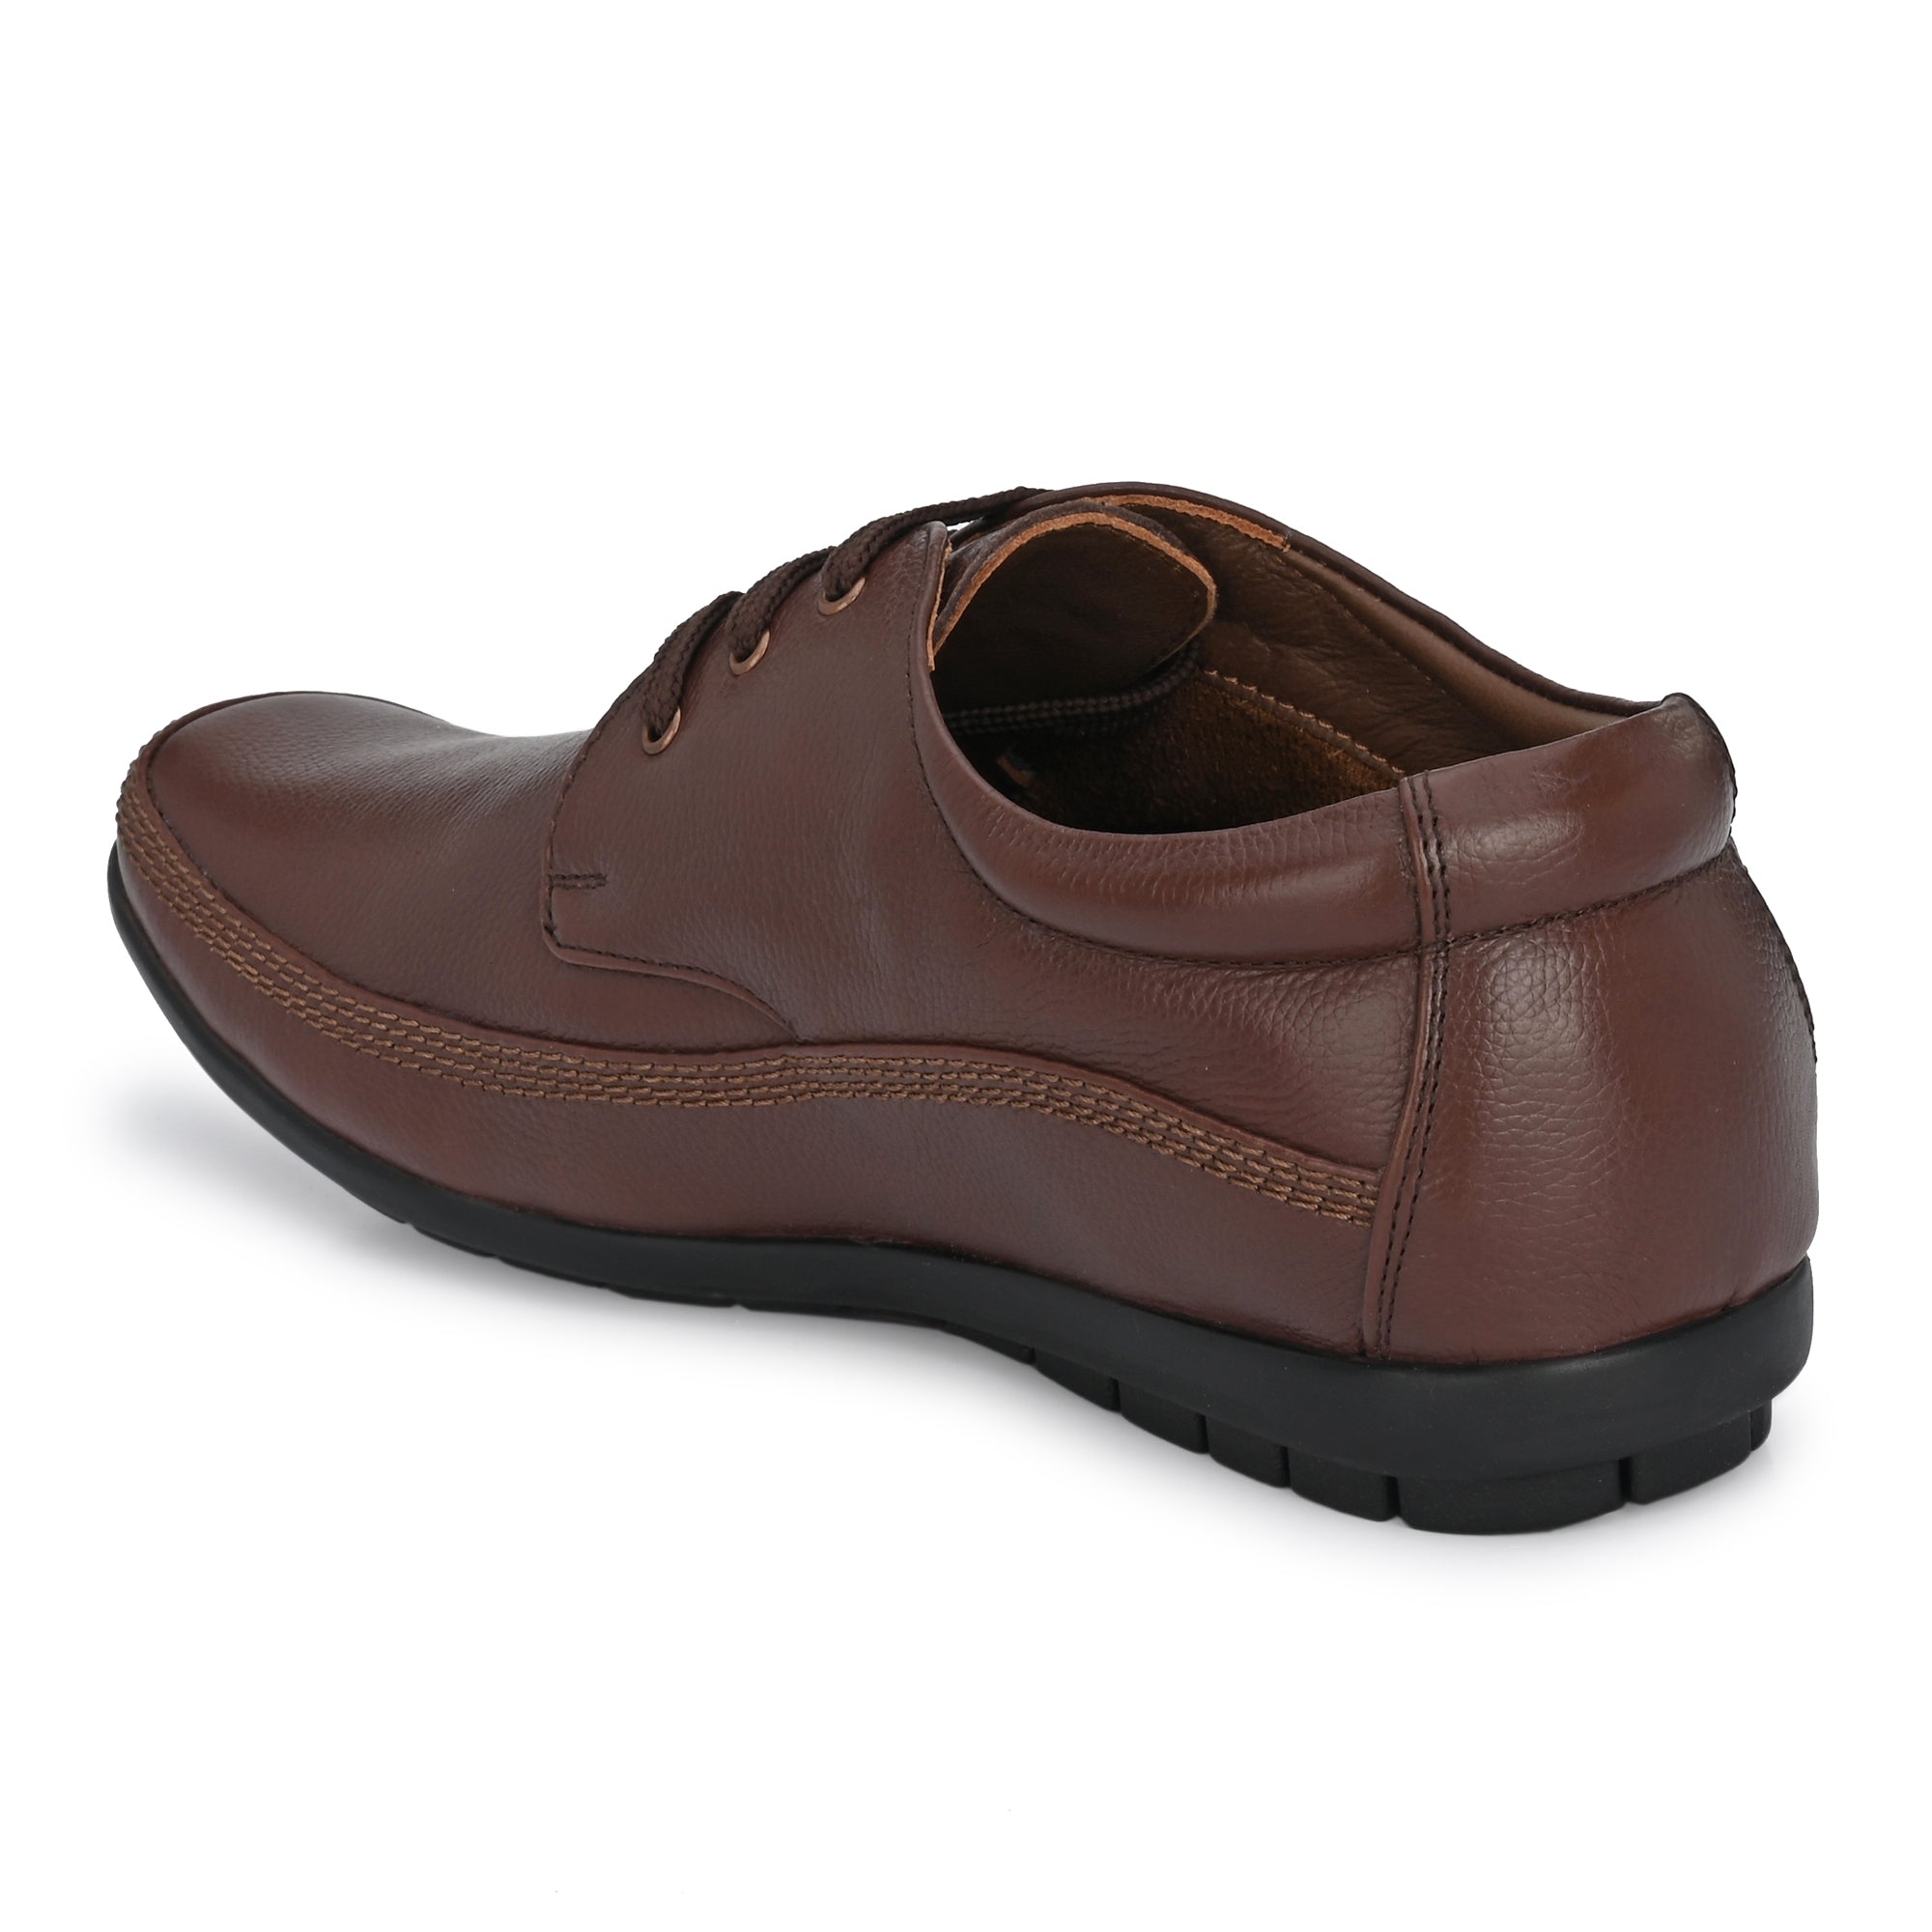 Egoss Leather Shoes for Men